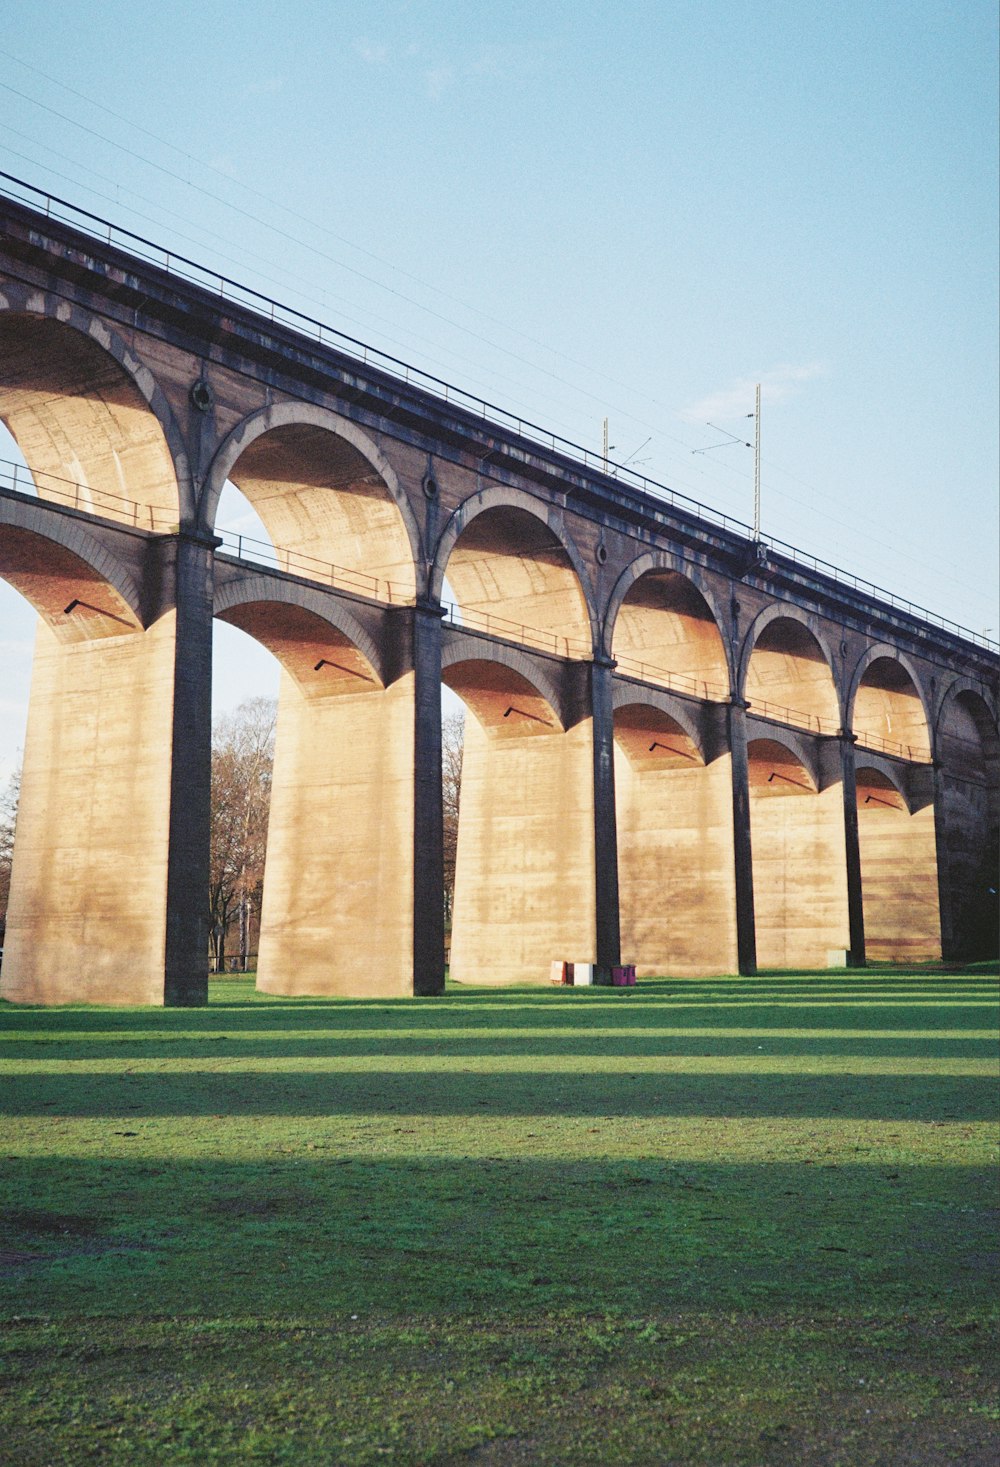 a large bridge spanning over a lush green field